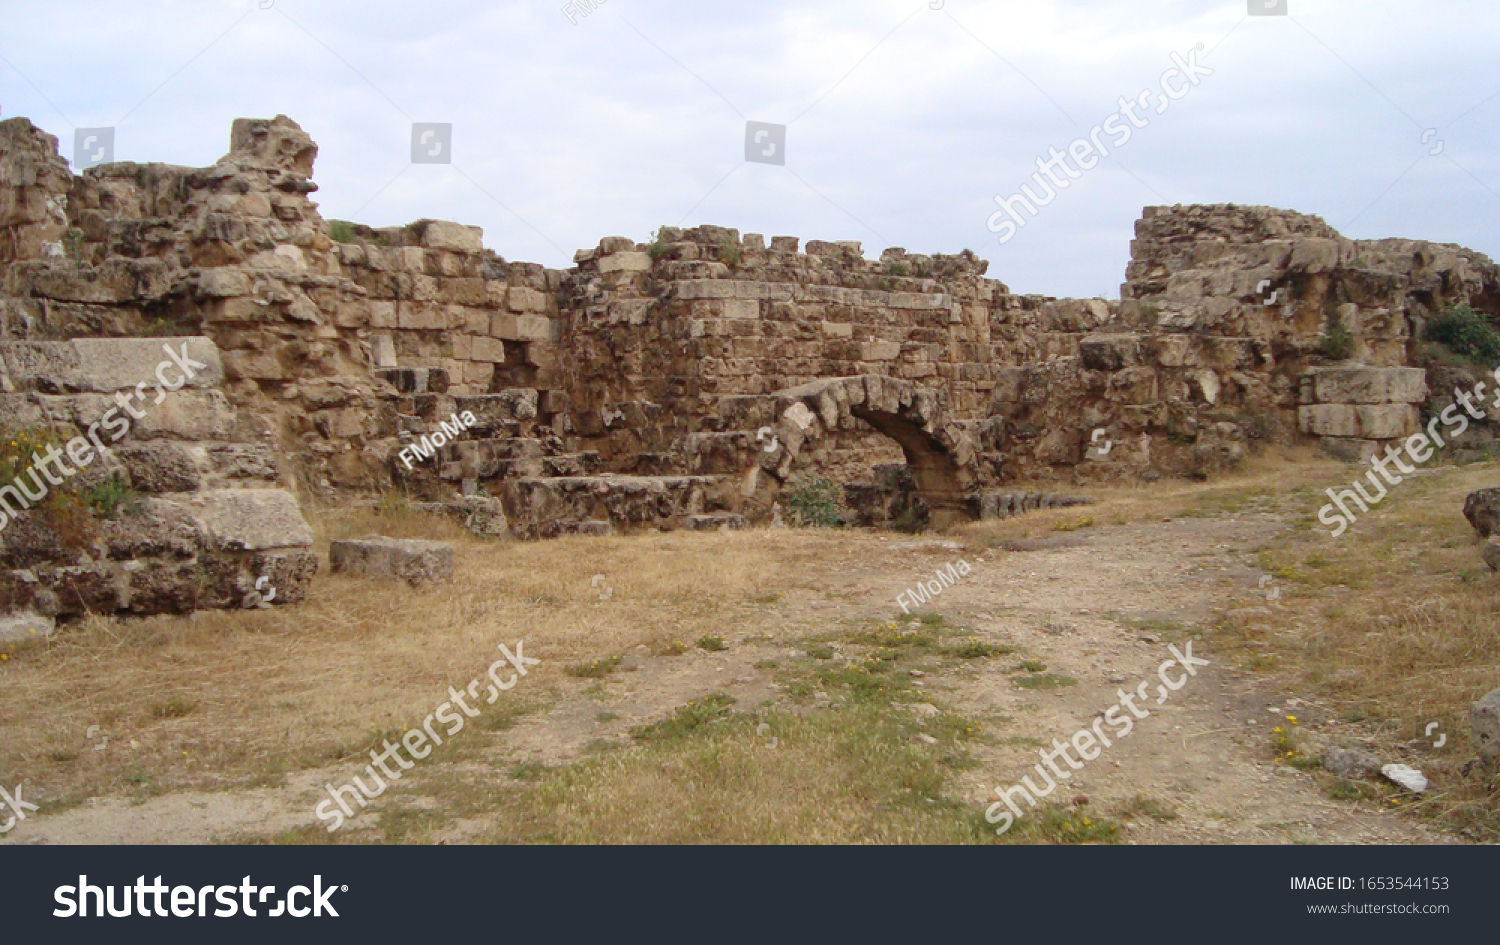 Destroyed walls, antique ruines from Northern Cyprus #1653544153